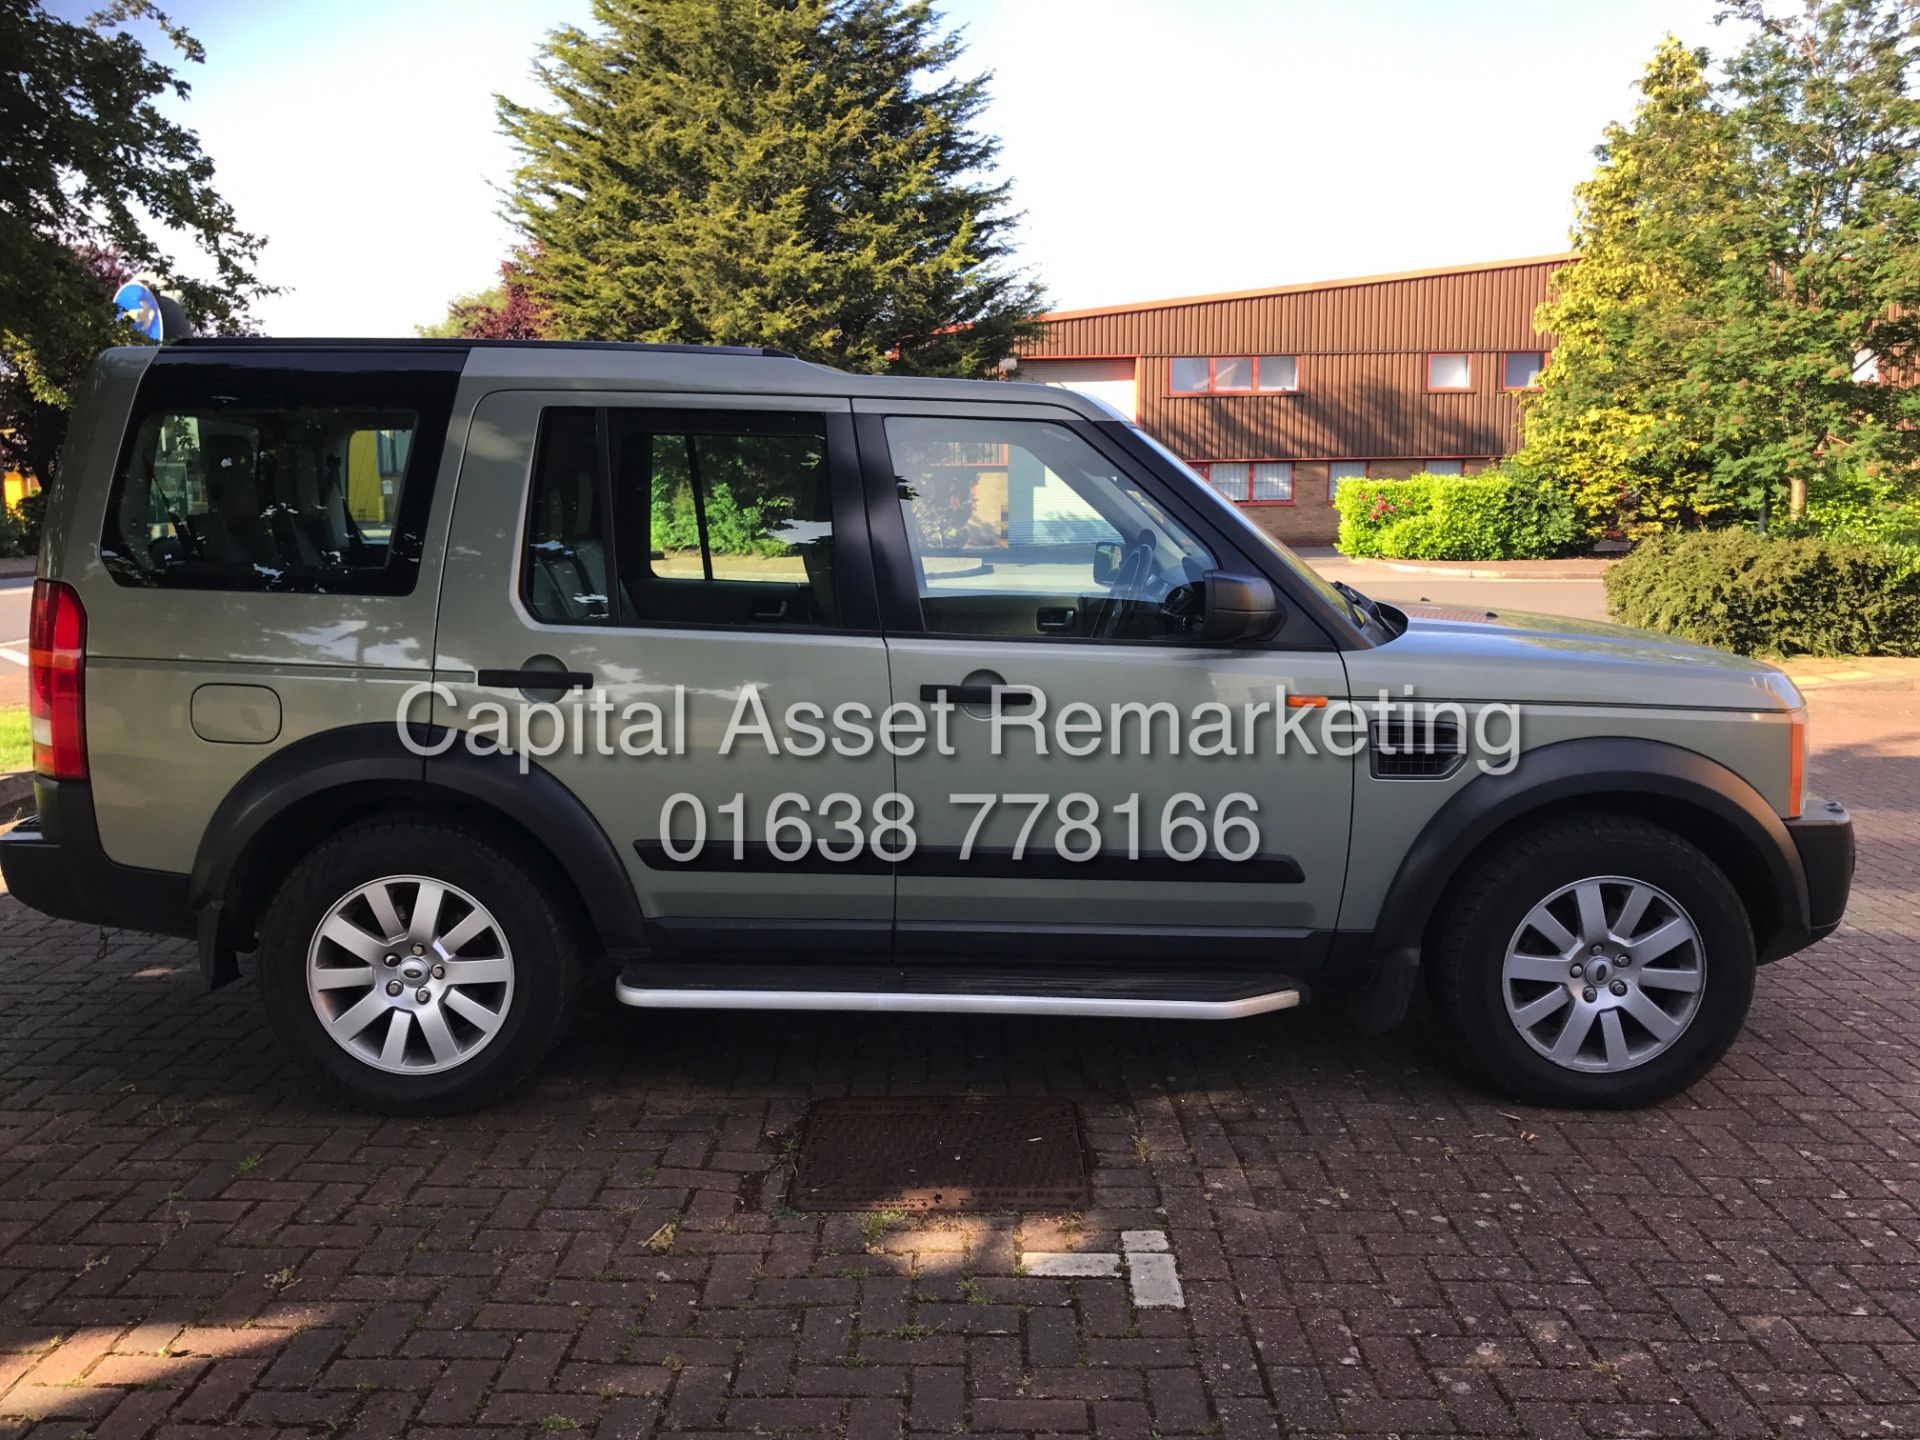 (ON SALE) LAND ROVER DISCOVERY TDV6 "SE 7 SEATER" GREAT SPEC - SAT NAV - FULL LEATHER - NO VAT - Image 10 of 28